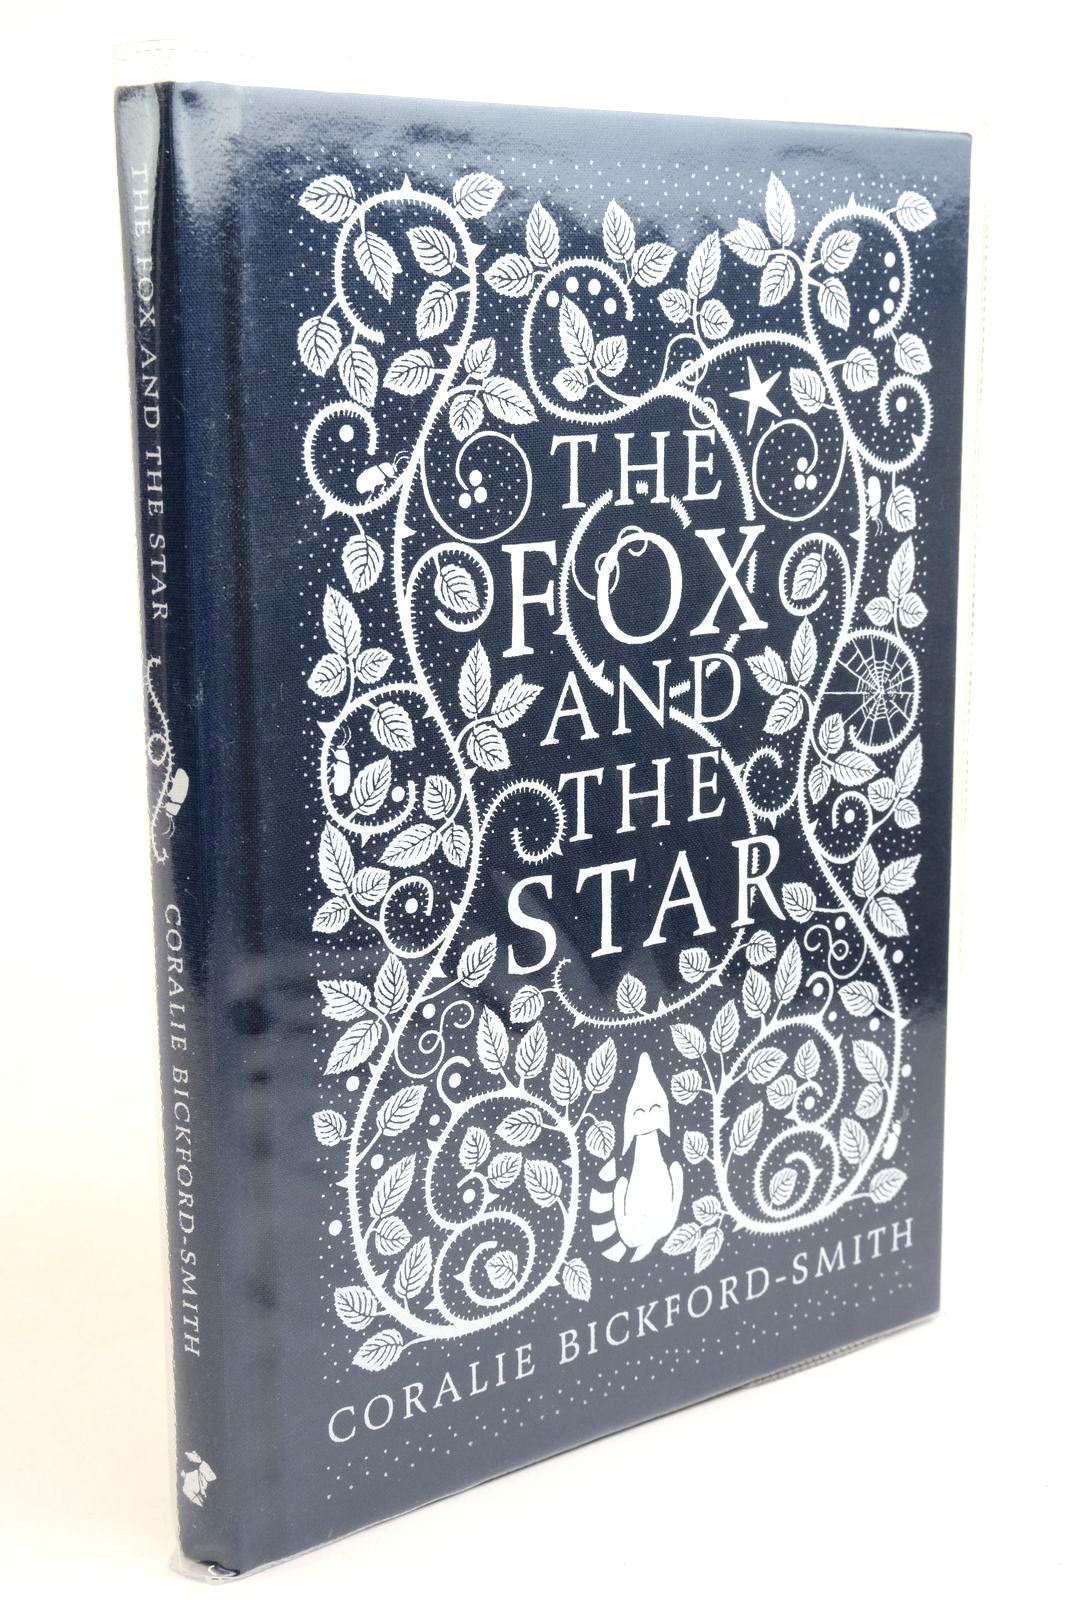 Photo of THE FOX AND THE STAR written by Bickford-Smith, Coralie illustrated by Bickford-Smith, Coralie published by Particular Books (STOCK CODE: 1322359)  for sale by Stella & Rose's Books